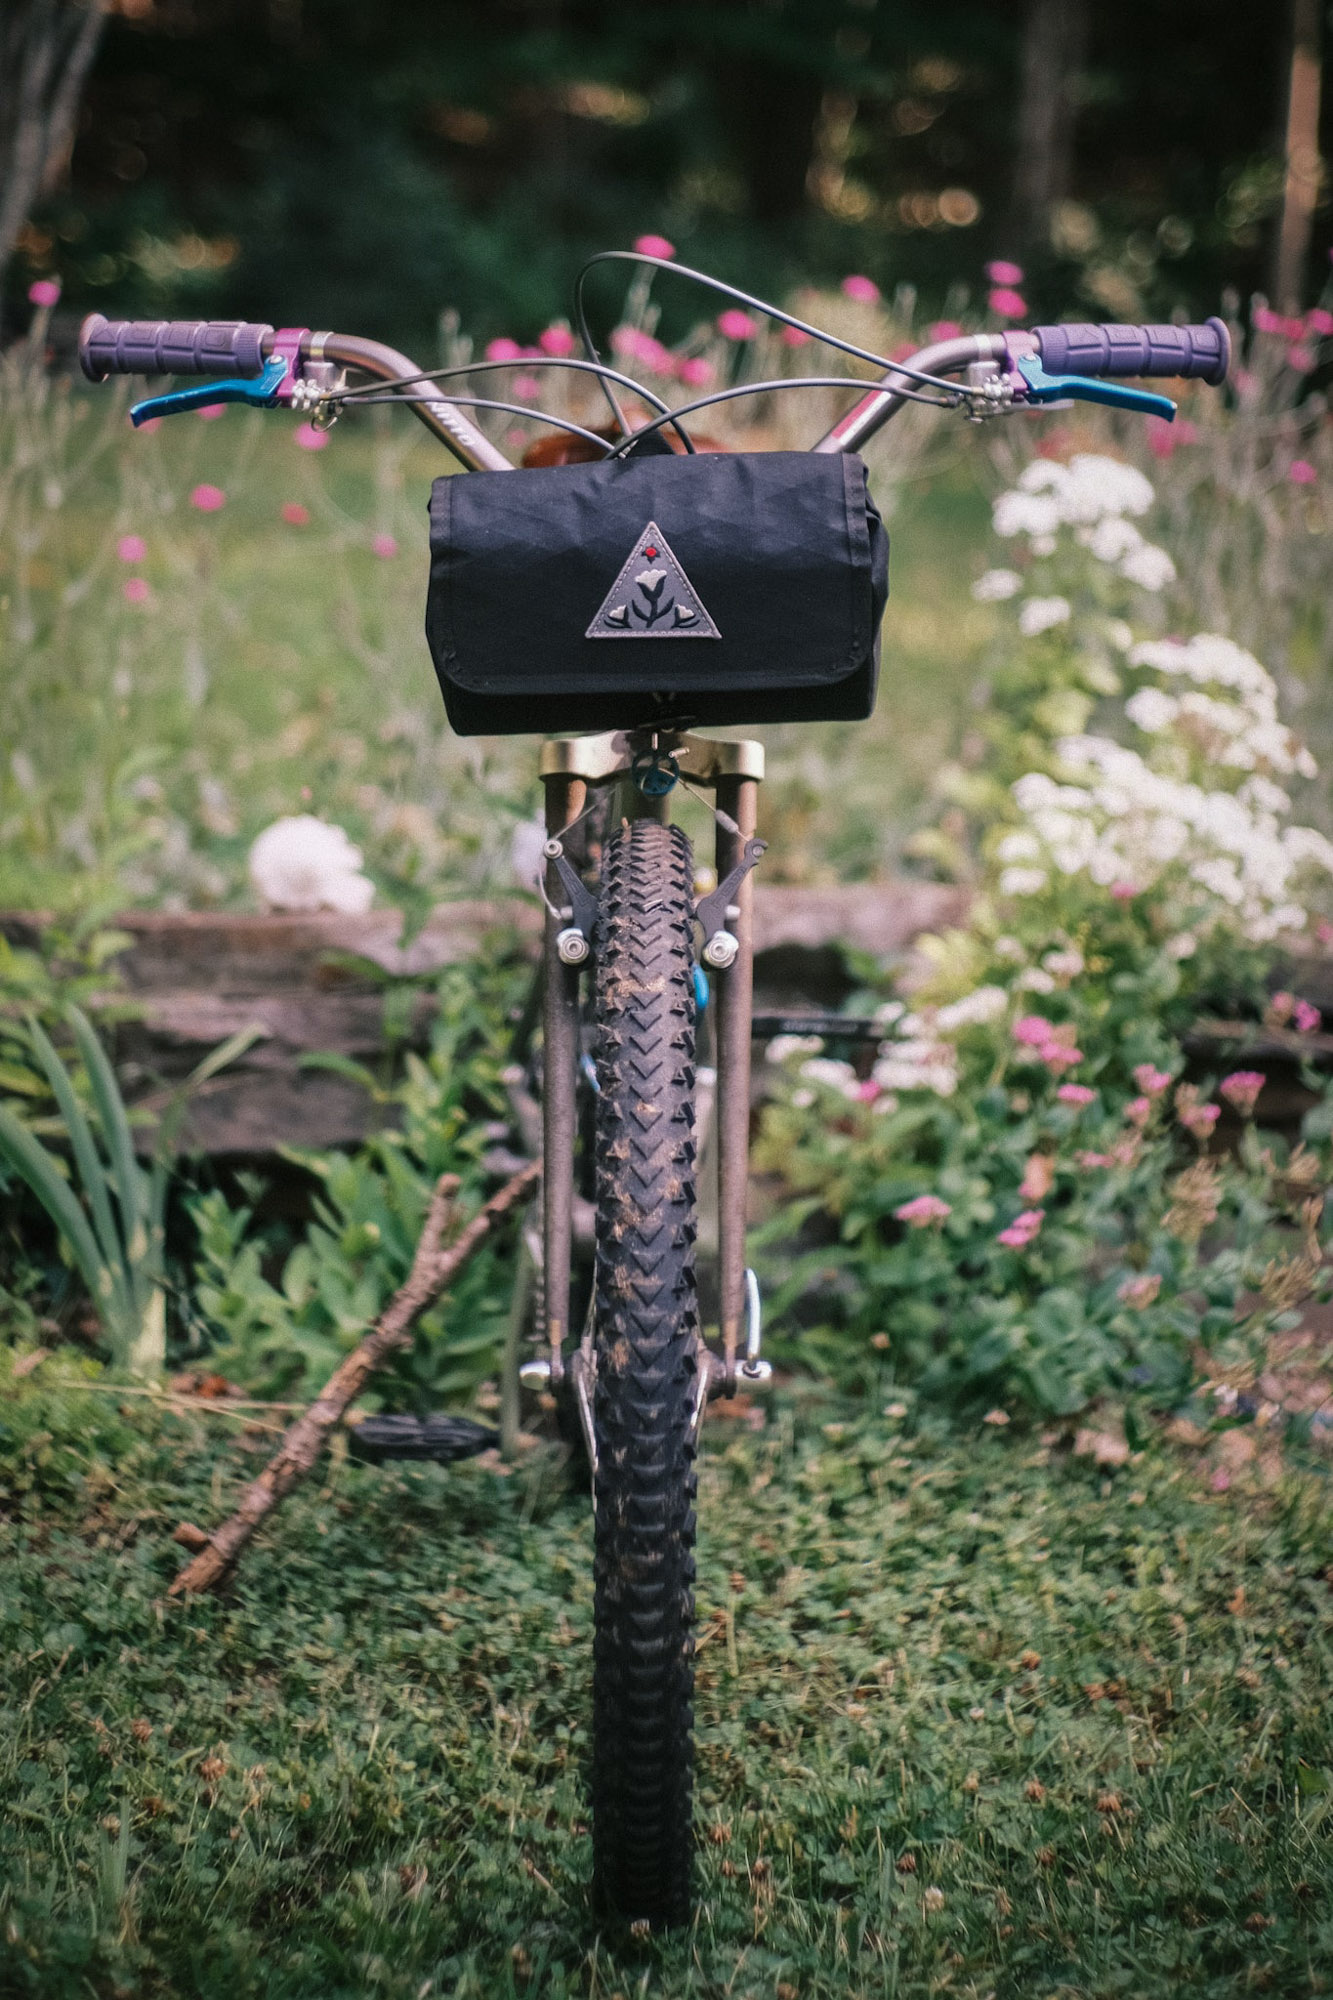 Have You Seen the New Ron's Bikes Fab's Abs? - BIKEPACKING.com